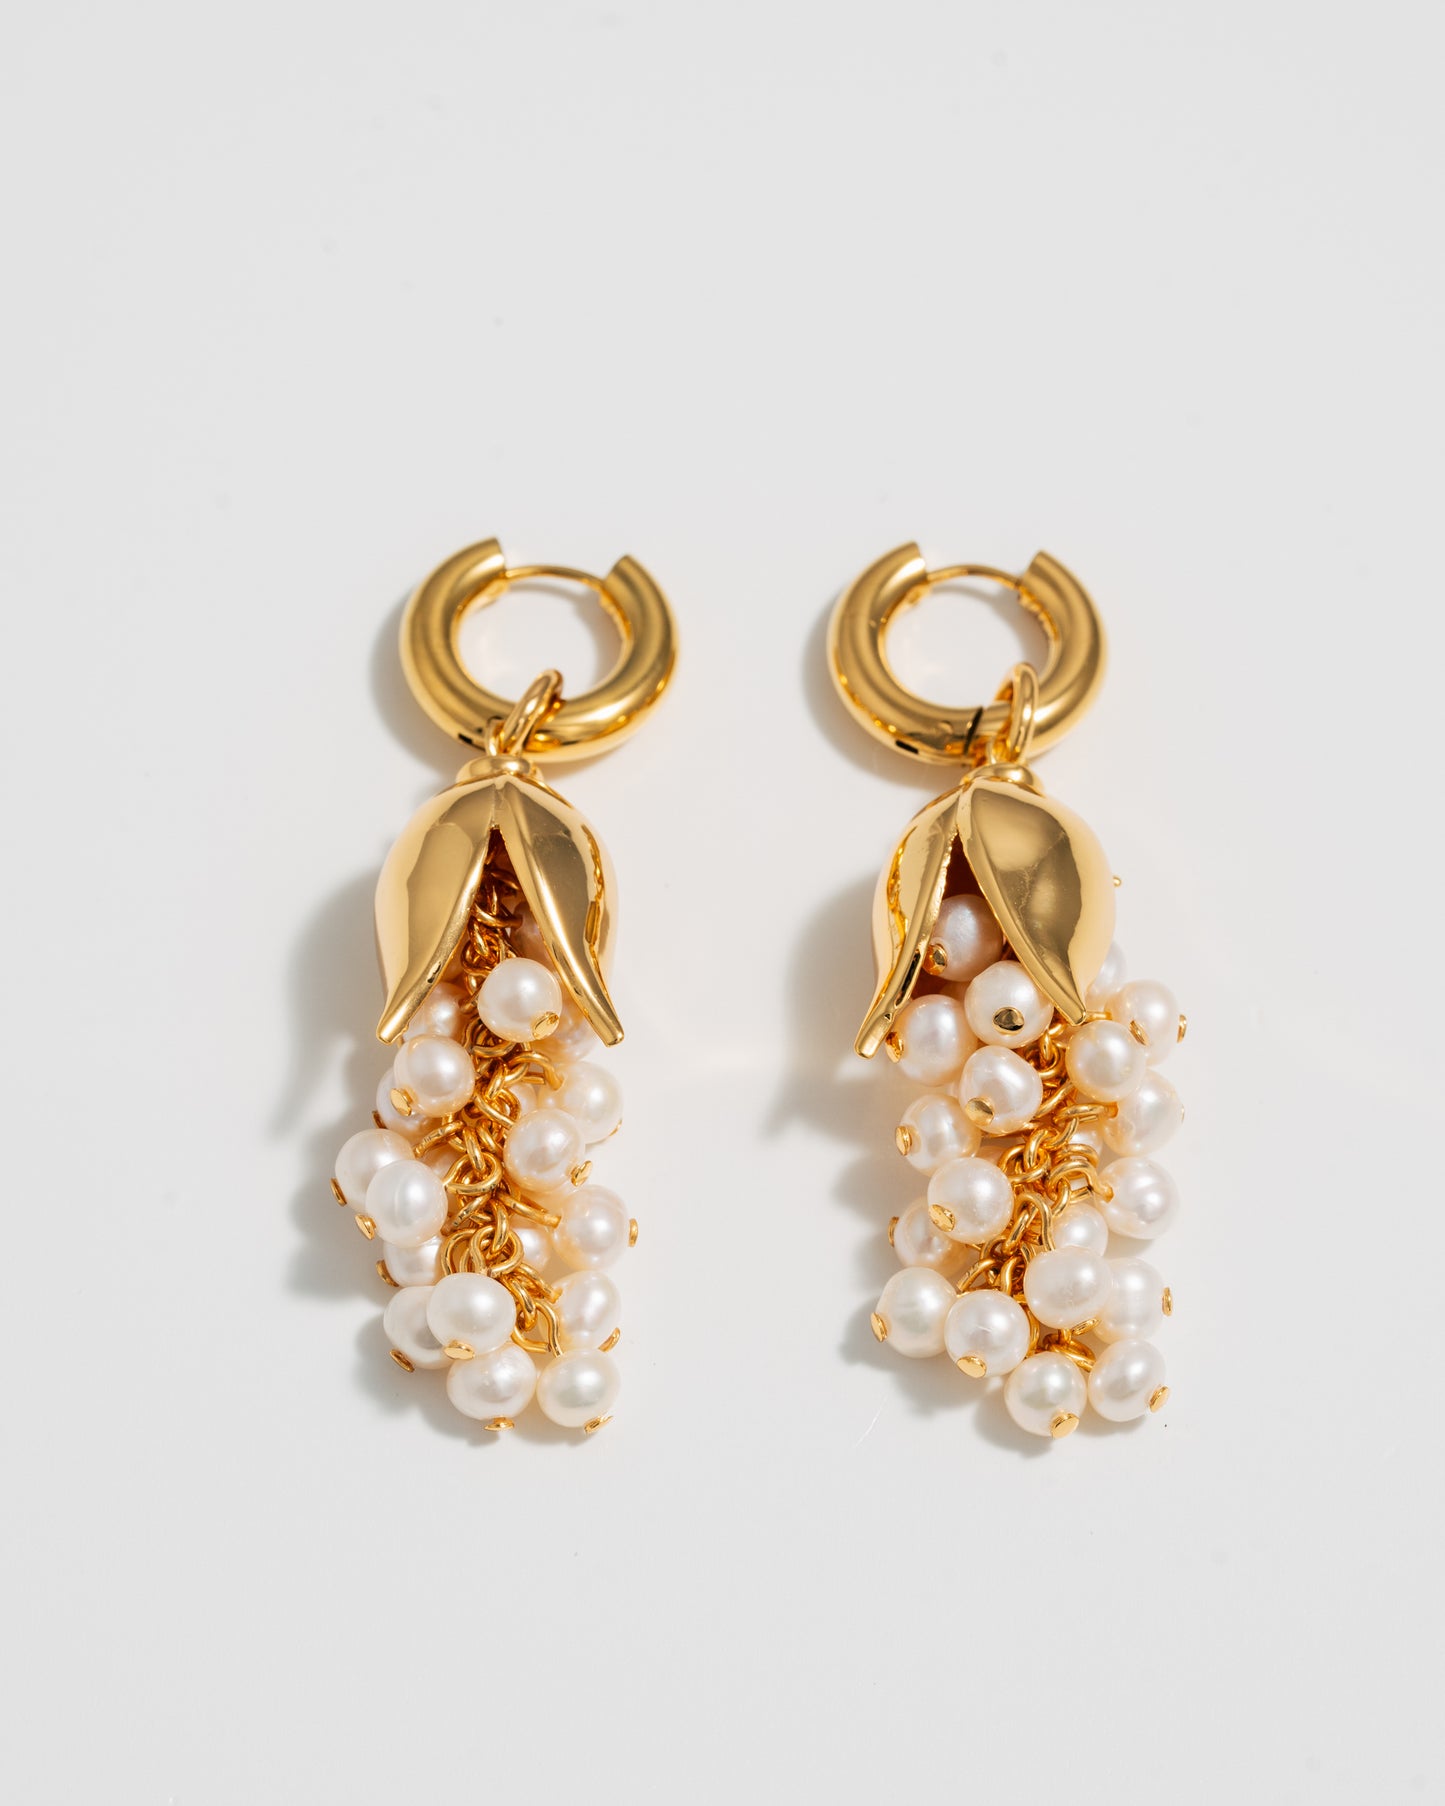 Lily of the Valley Earrings - Gold